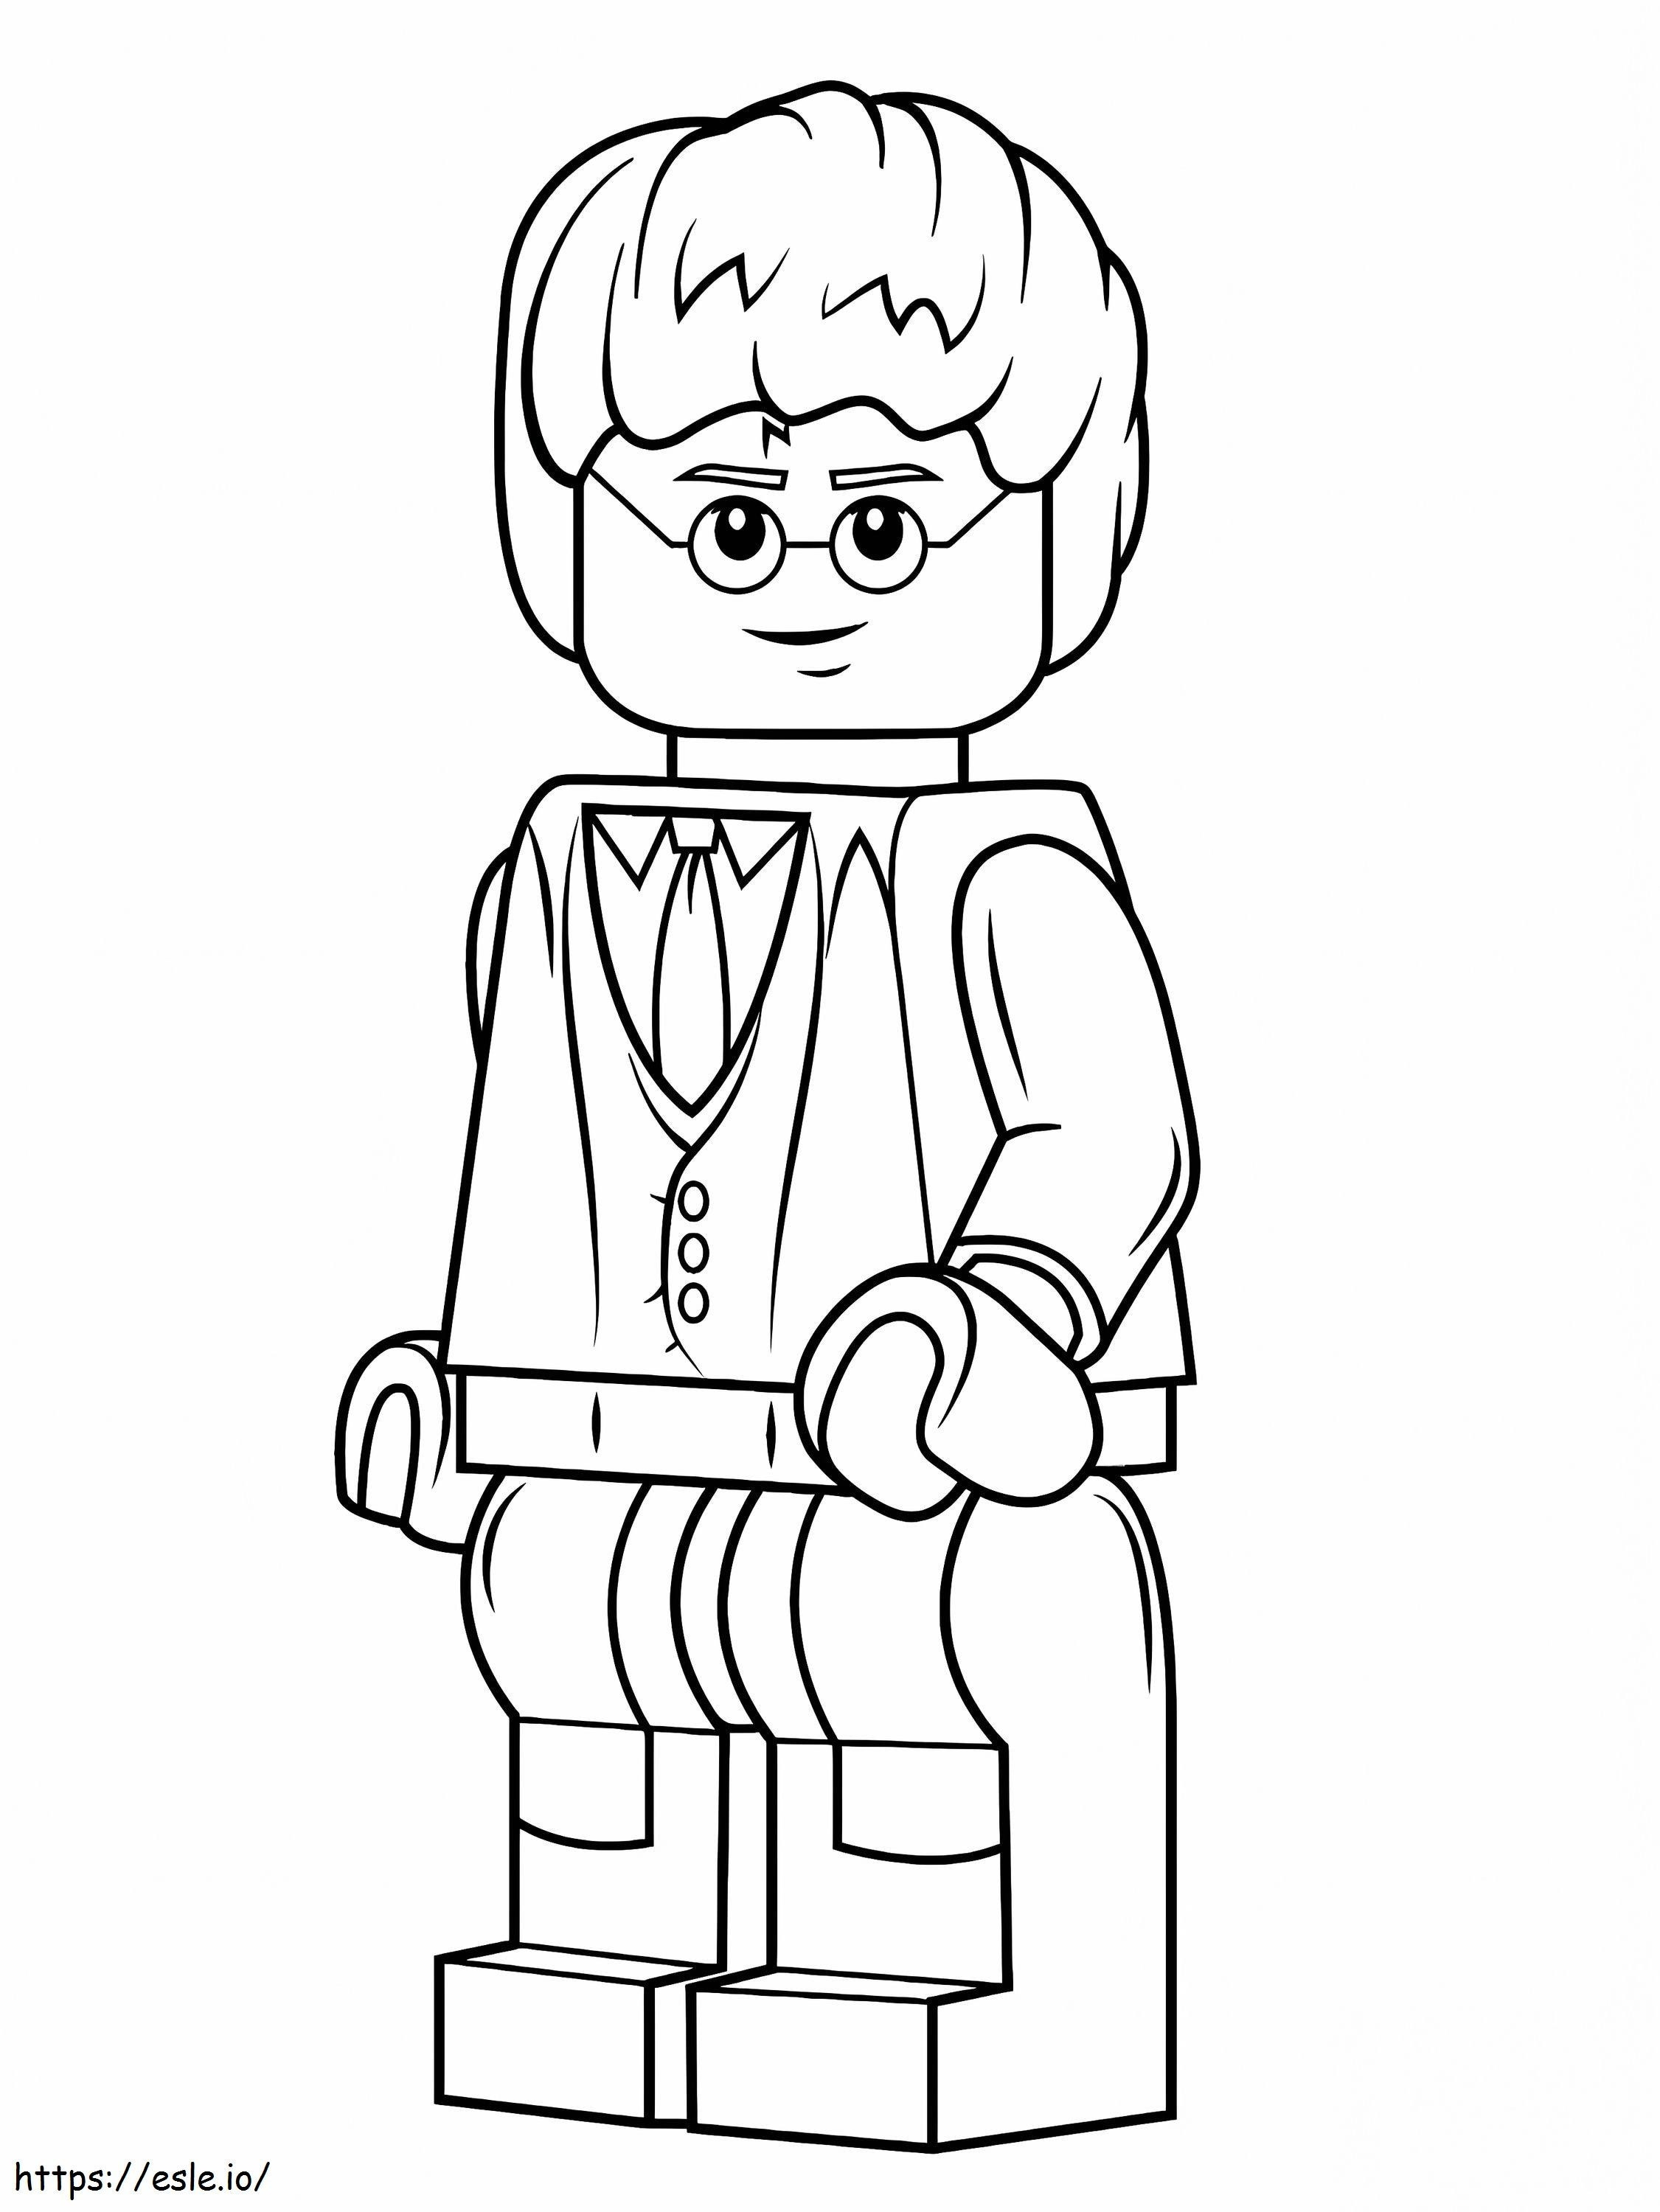 Lego Harry Potter Pinterest Unusual 0 coloring page